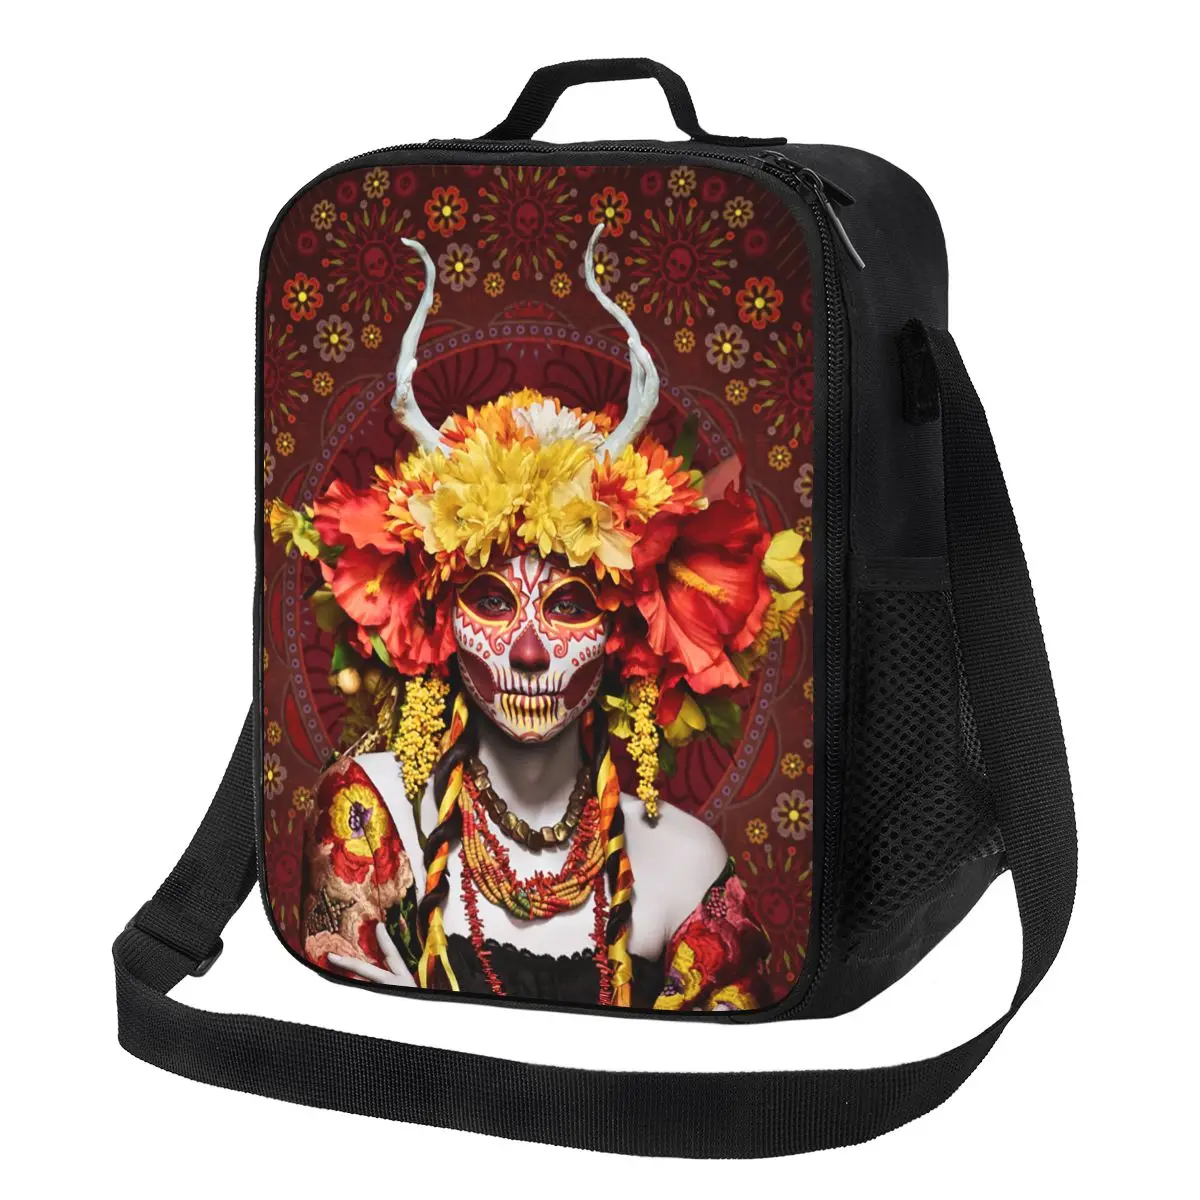 

Horror Mexican Lady Halloween Insulated Lunch Bag for Work School Day Of The Dead Sugar Skull Leakproof Thermal Cooler Bento Box